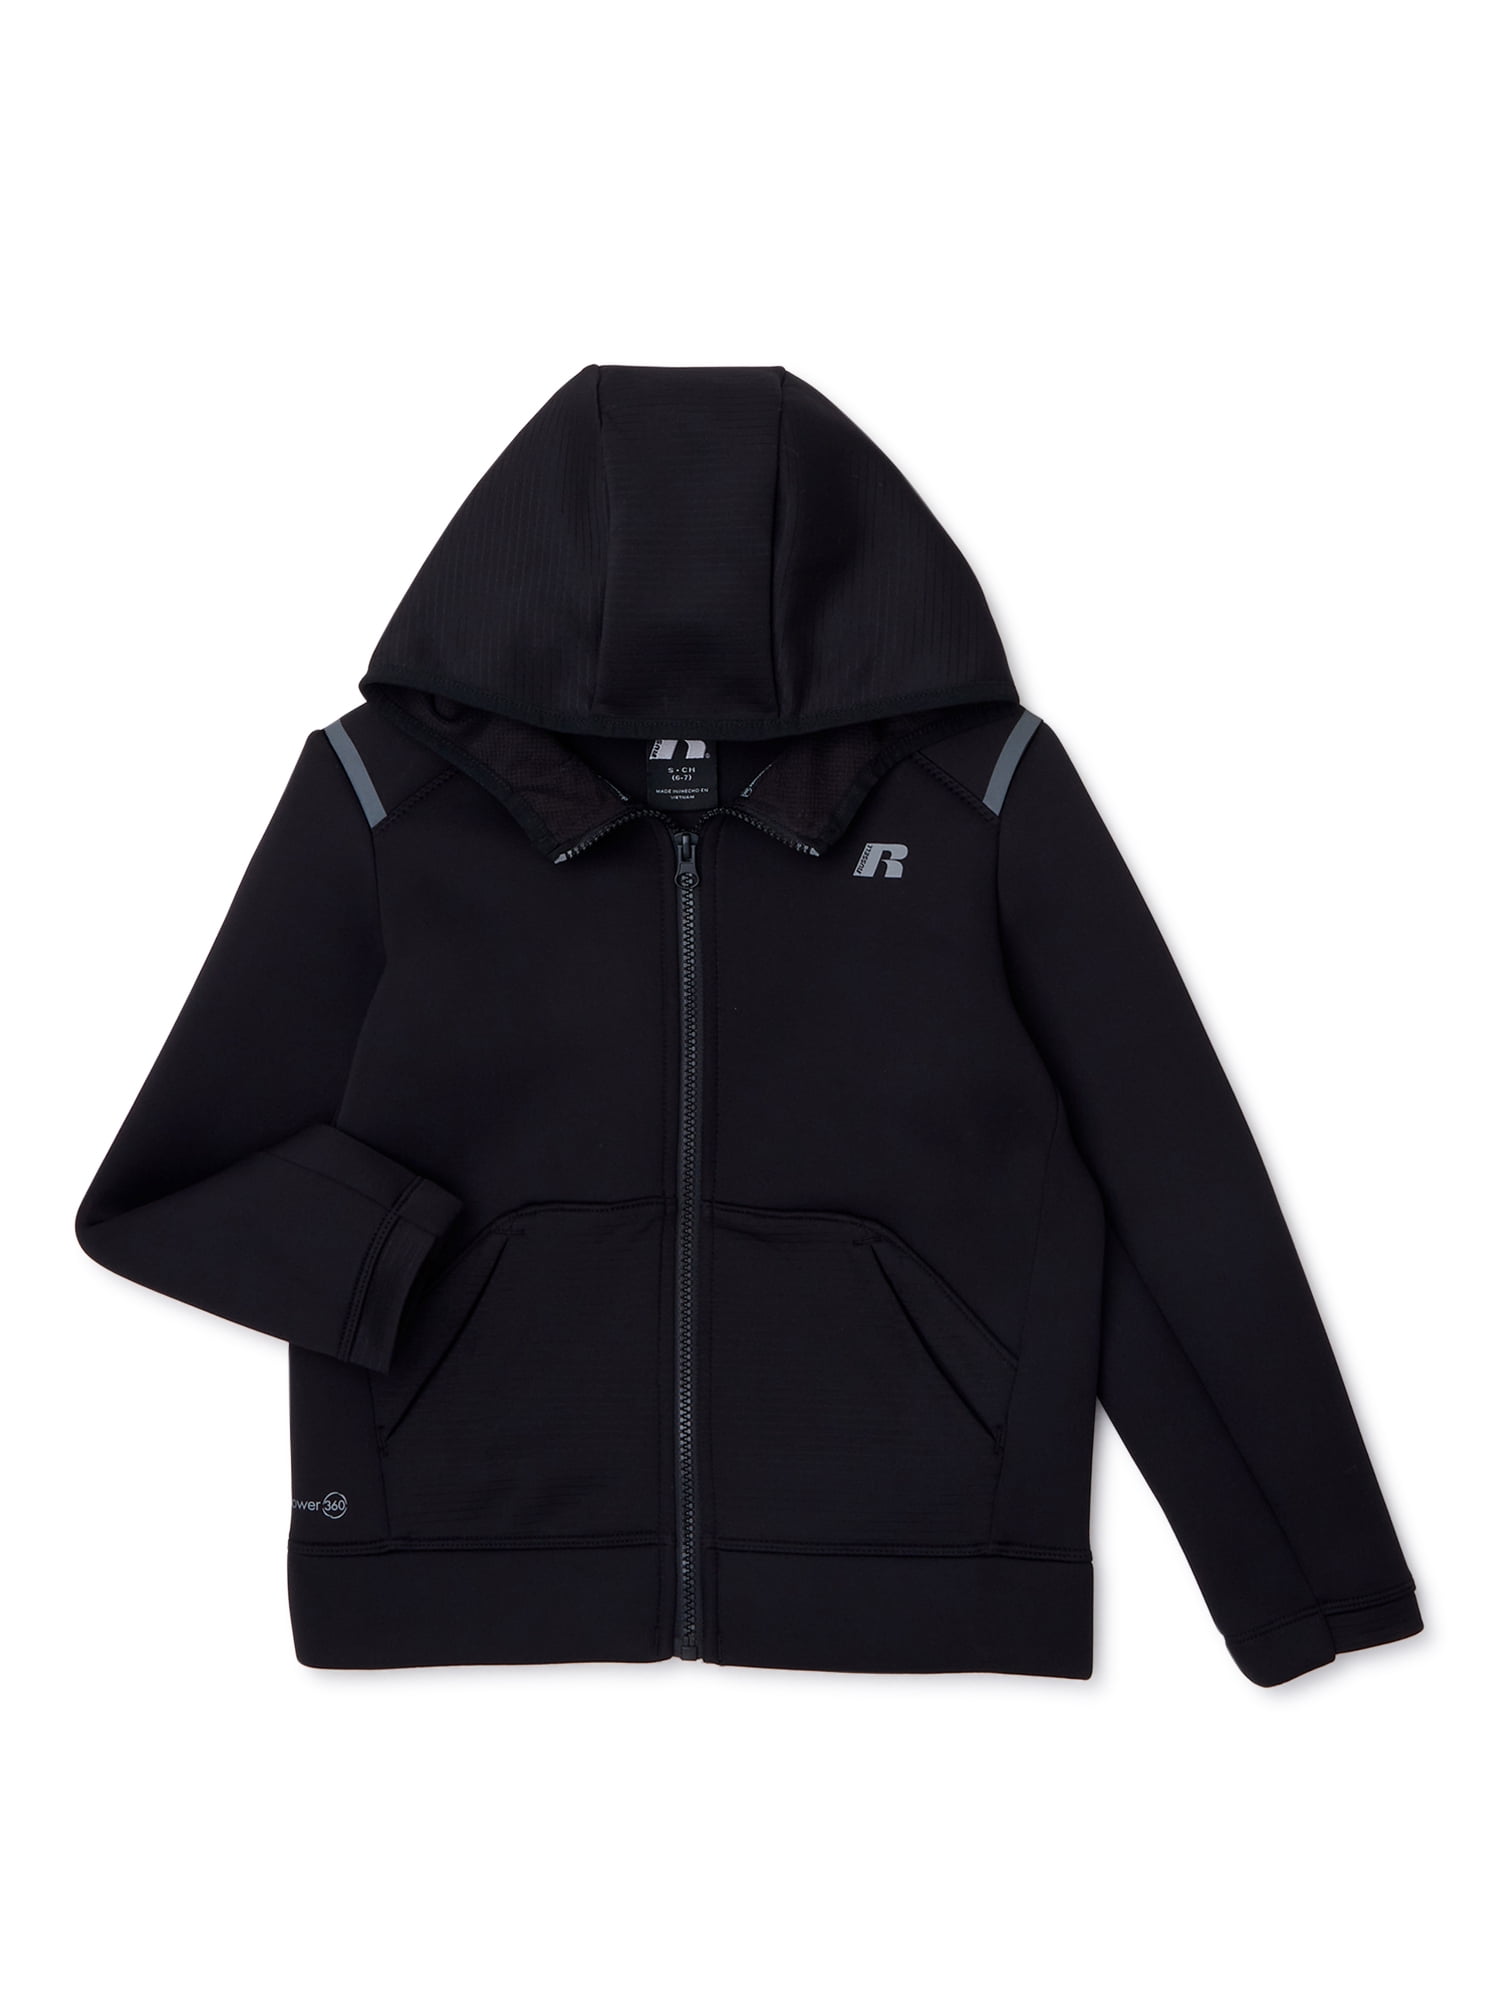 Russell - Russell Boys Stretch Knit Full Zip Performance Jacket, Sizes ...